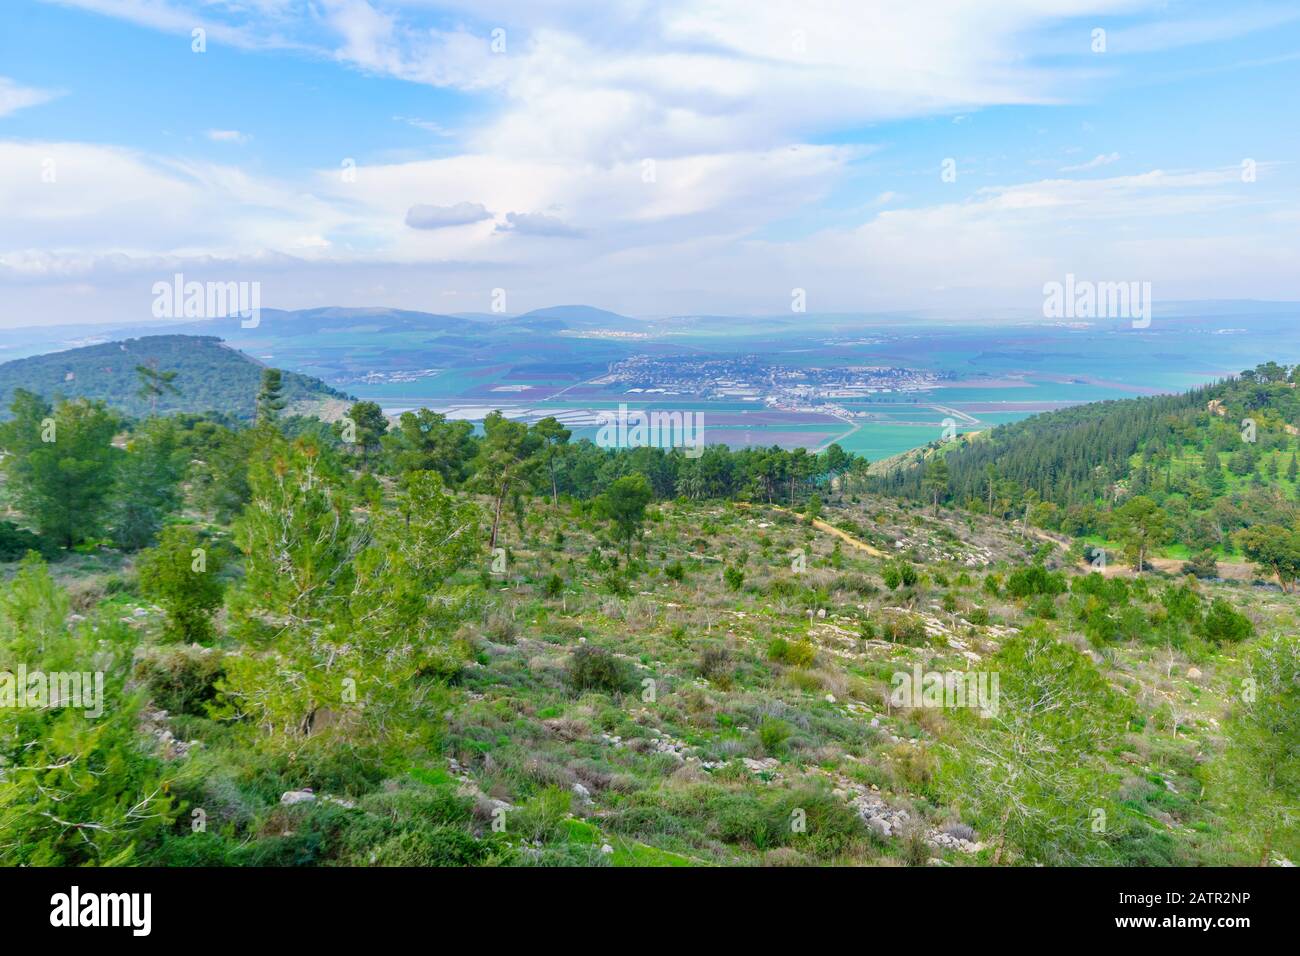 View of landscape and countryside in the eastern part of the Jezreel Valley from the Gilboa ridge, Northern Israel Stock Photo